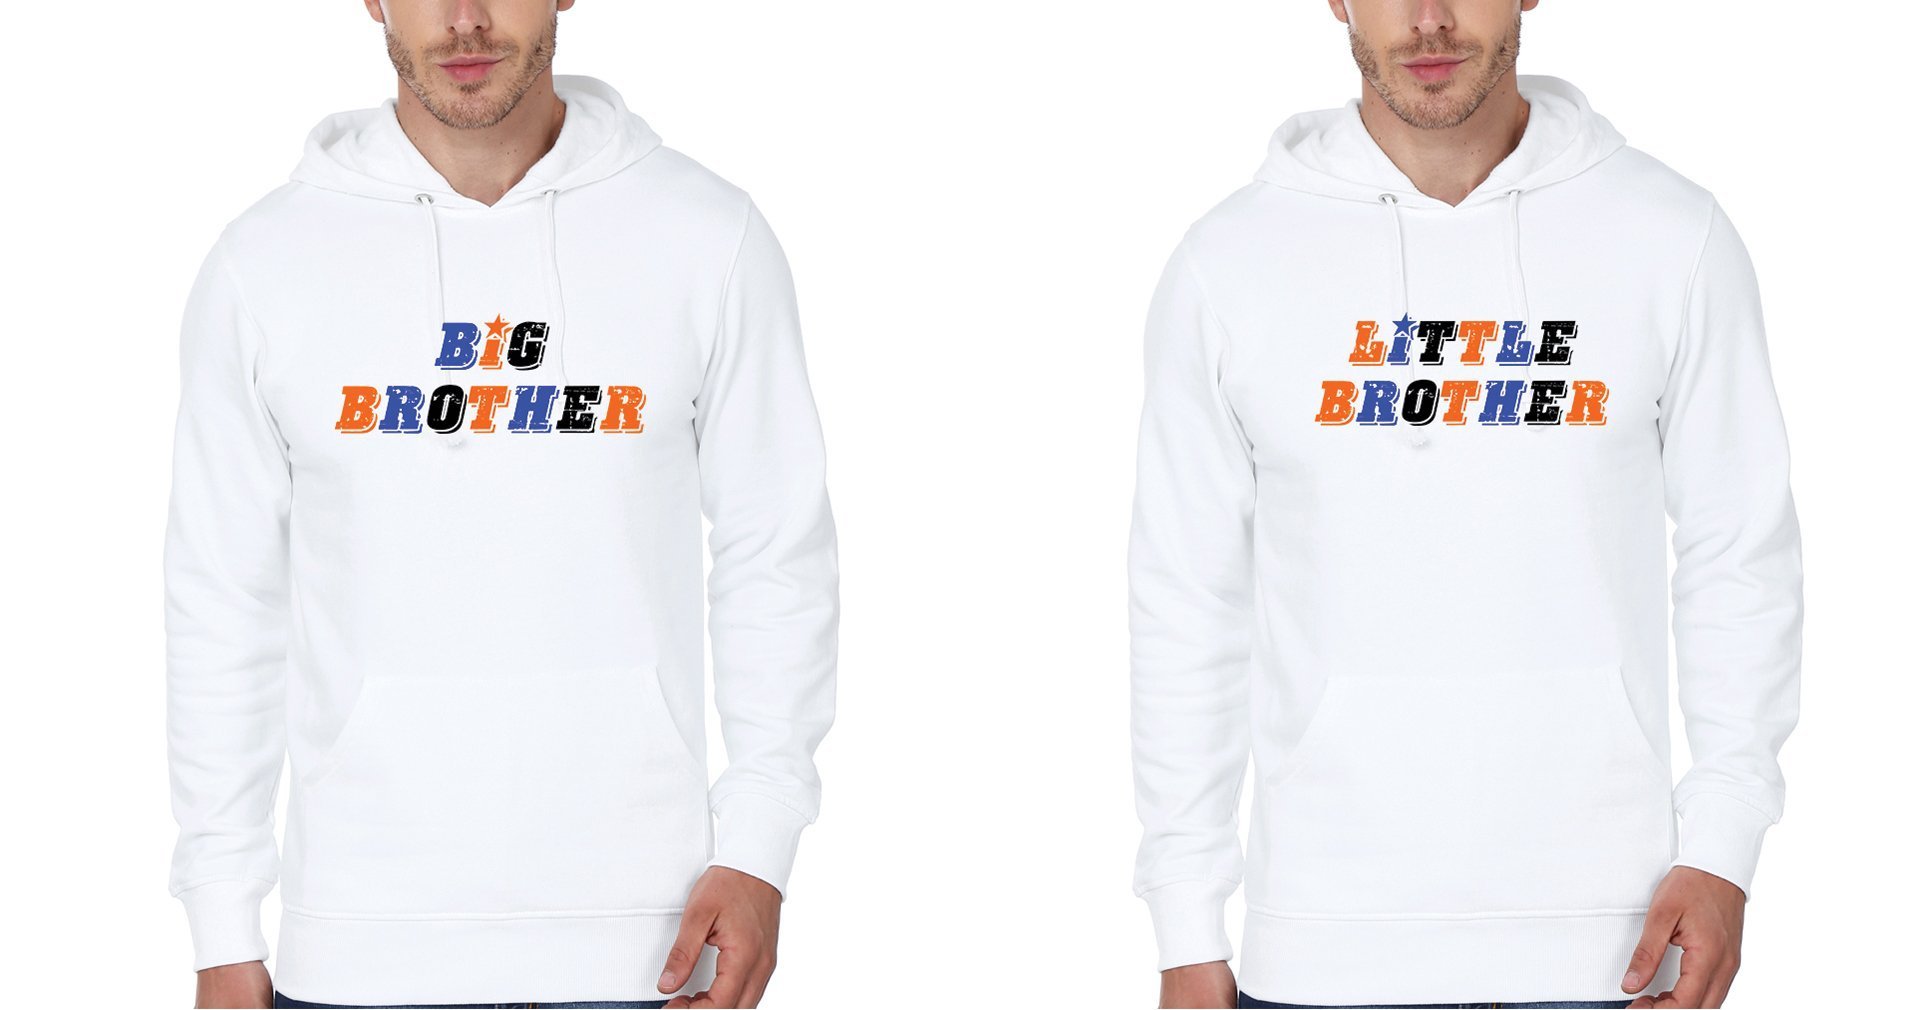 BIG LIL BRO Brother-Brother Hoodies-FunkyTradition - FunkyTradition